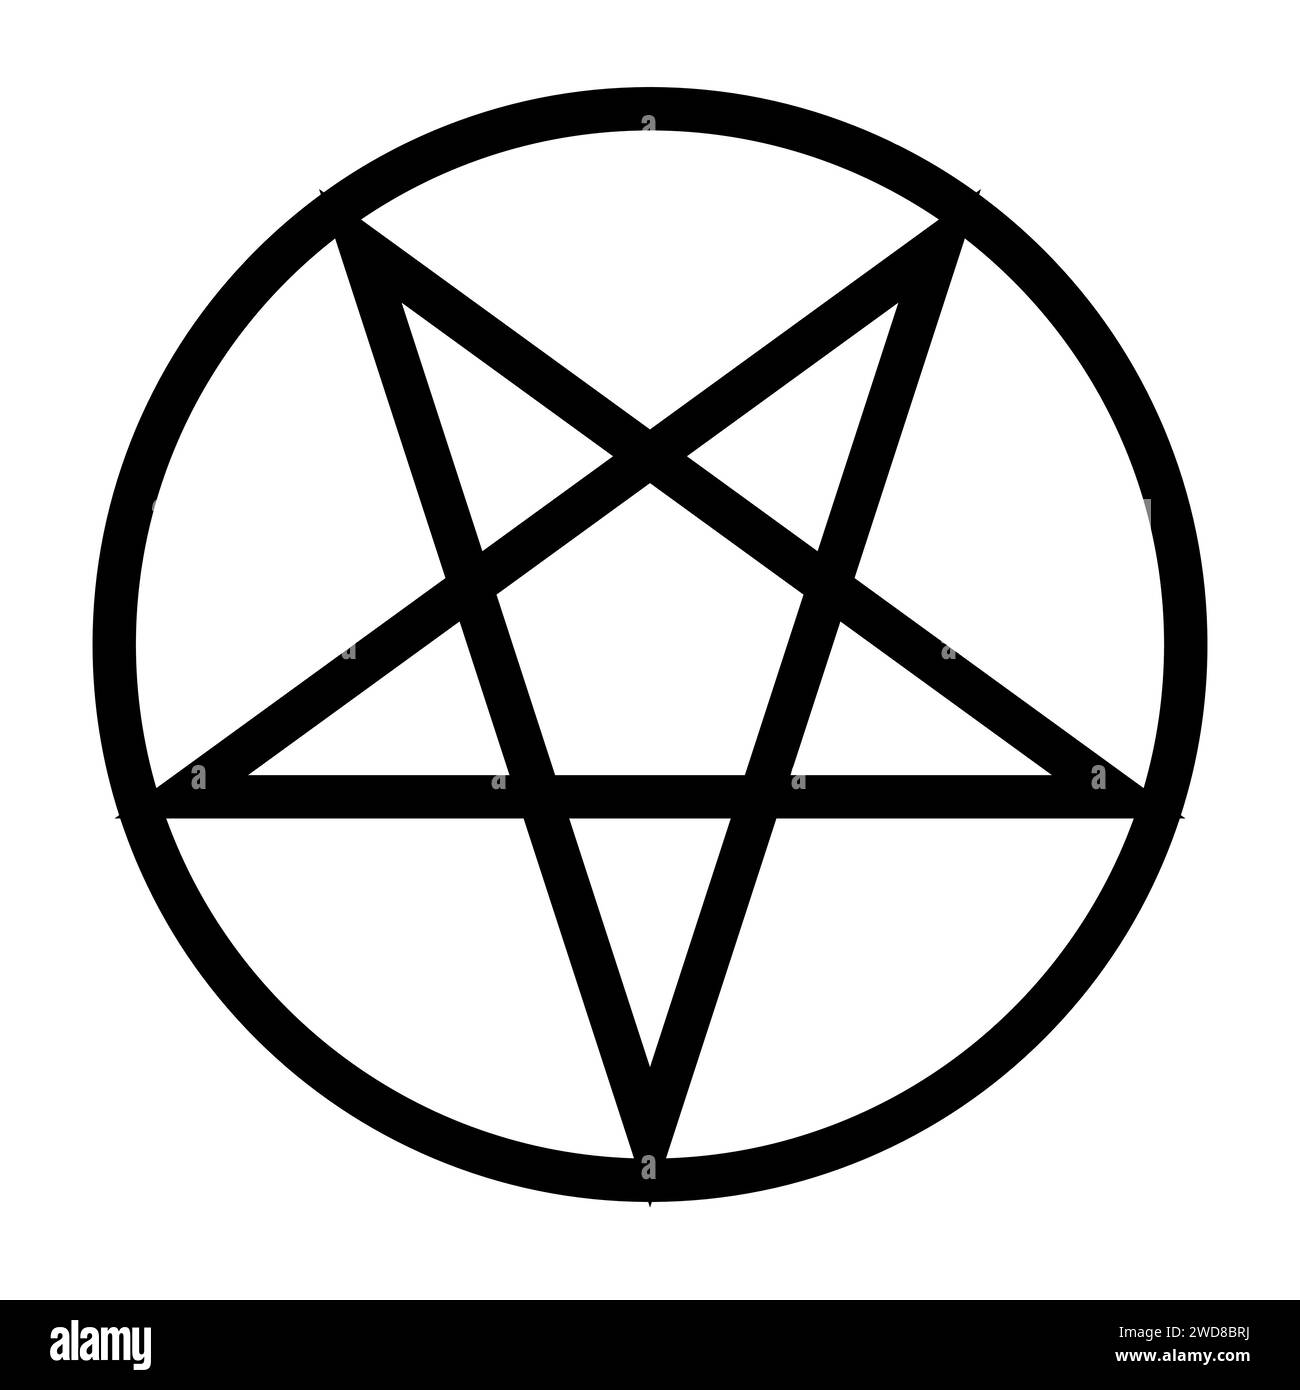 Inverted pentagram circumscribed by a circle. Five-pointed star sign. Magical symbol of Satanism. Simple flat black illustration. Stock Vector